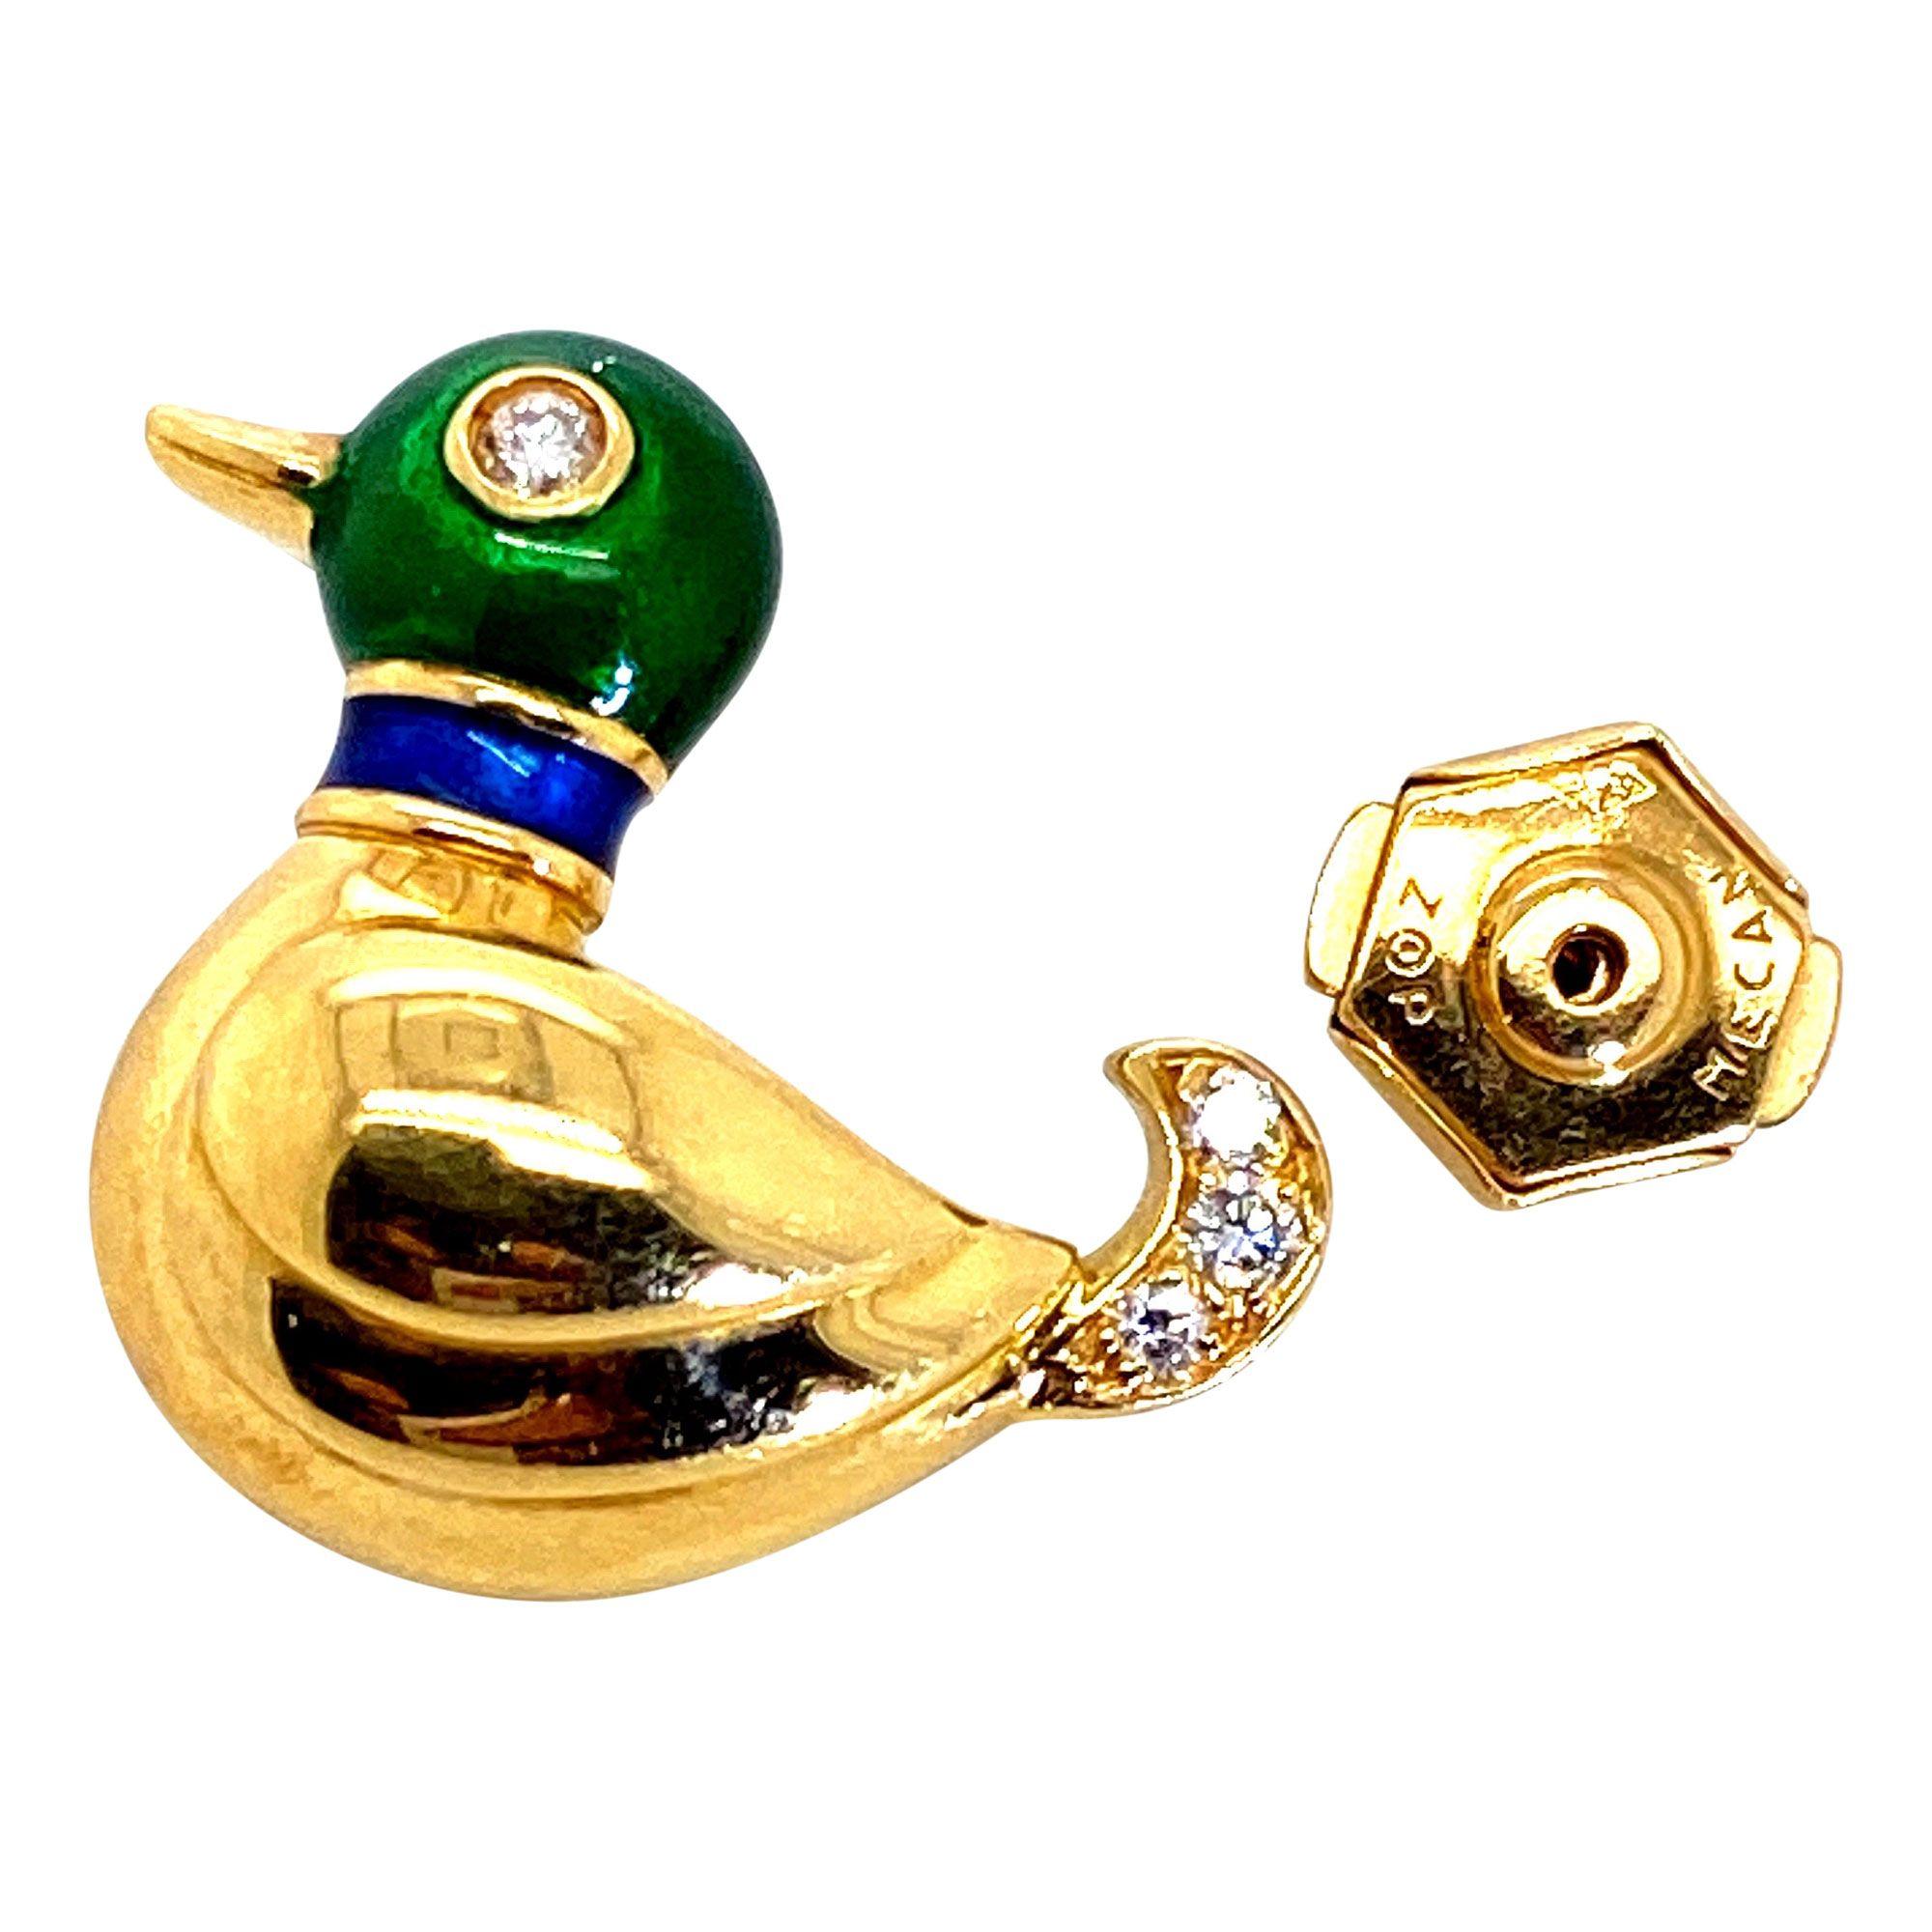 How cute is this little guy! A fabulous Cartier duck that is the perfect little friend to wear on a jacket or as a tie pin, gents this one could be for you. What a talking point, everyone will notice this cutie. Beautifully crafted as Cartier know